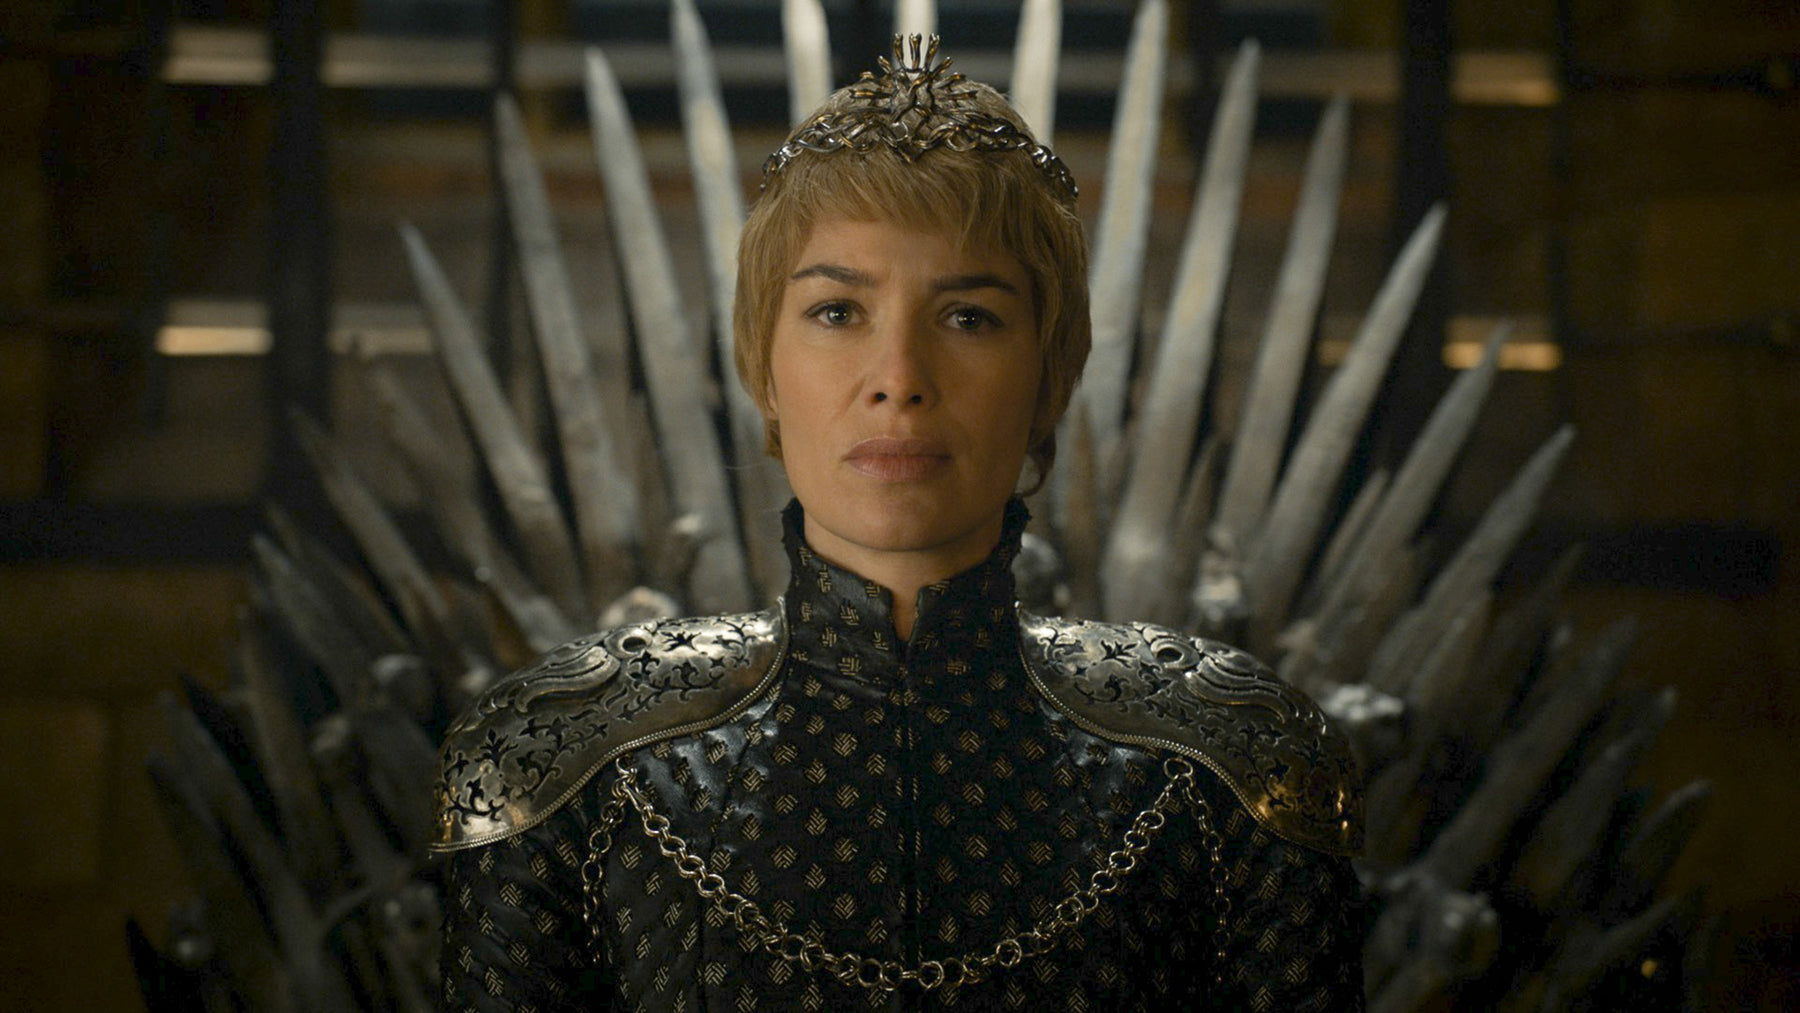 Cersei Lannister sits on the Iron Throne in a crown.